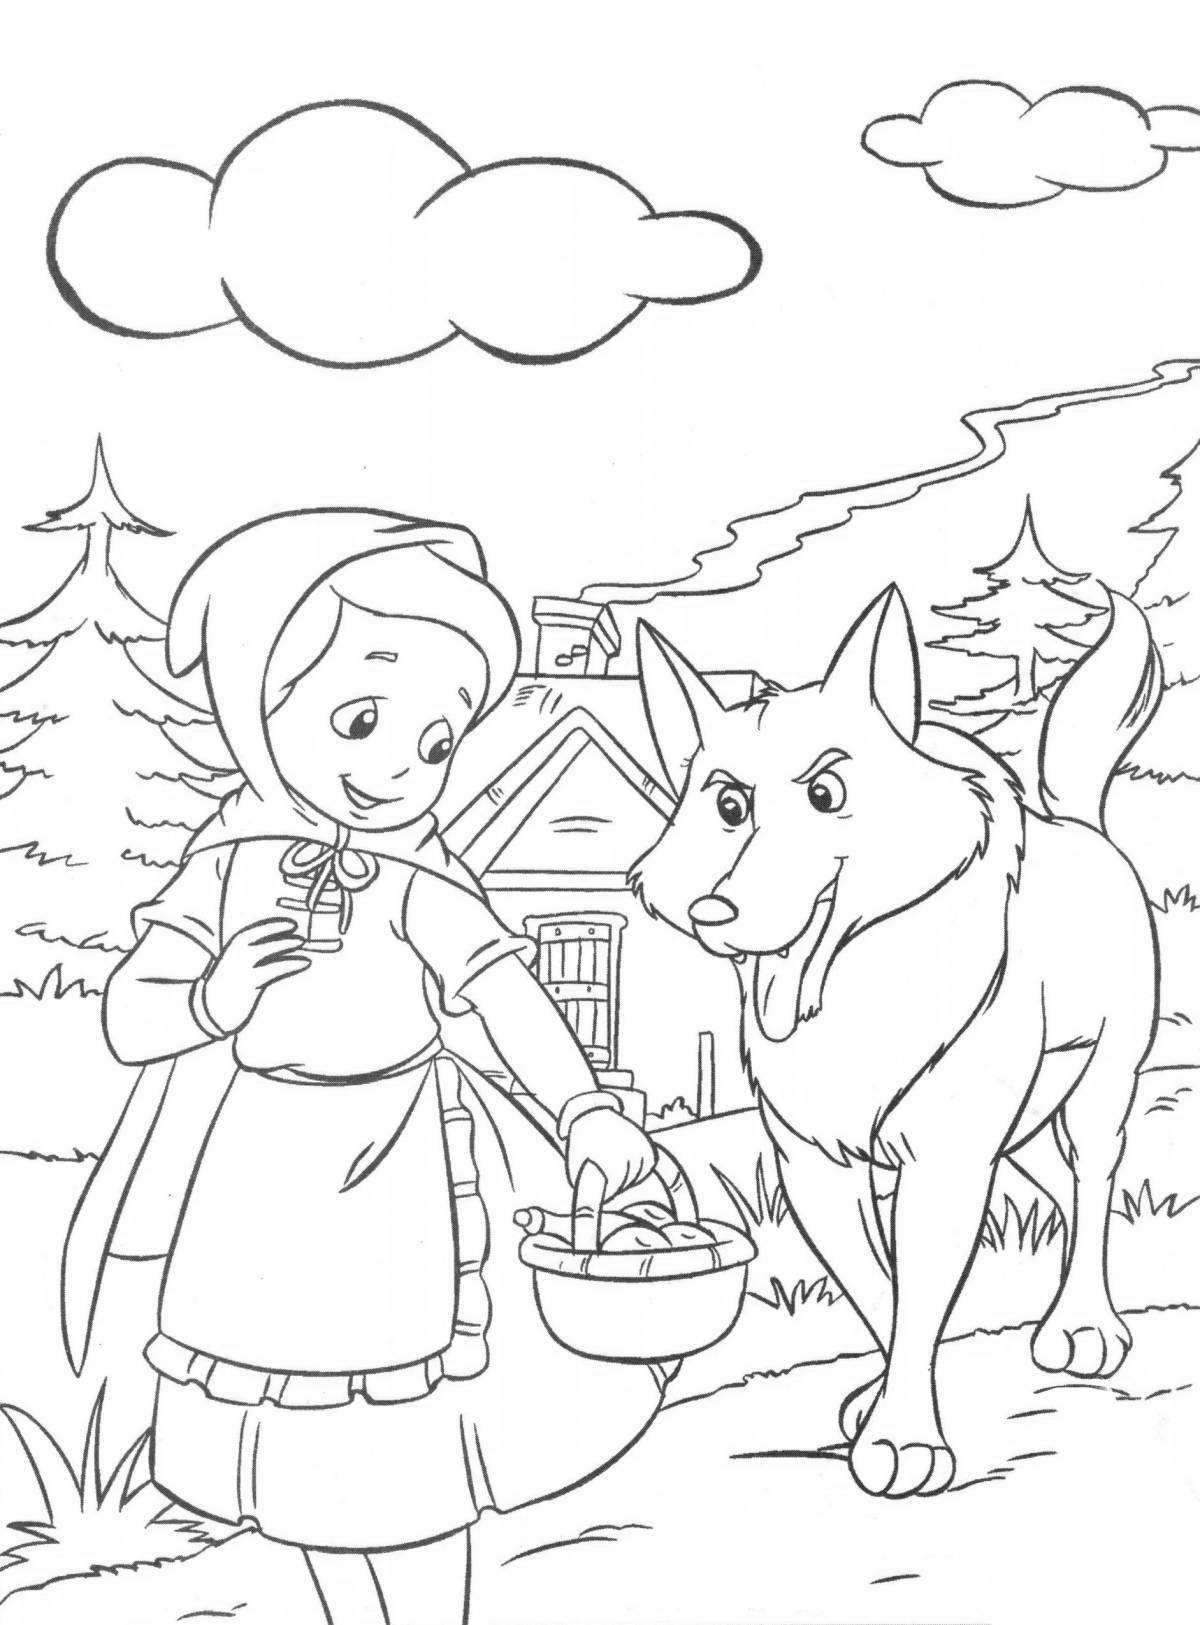 Humorous gray wolf and little red riding hood coloring book